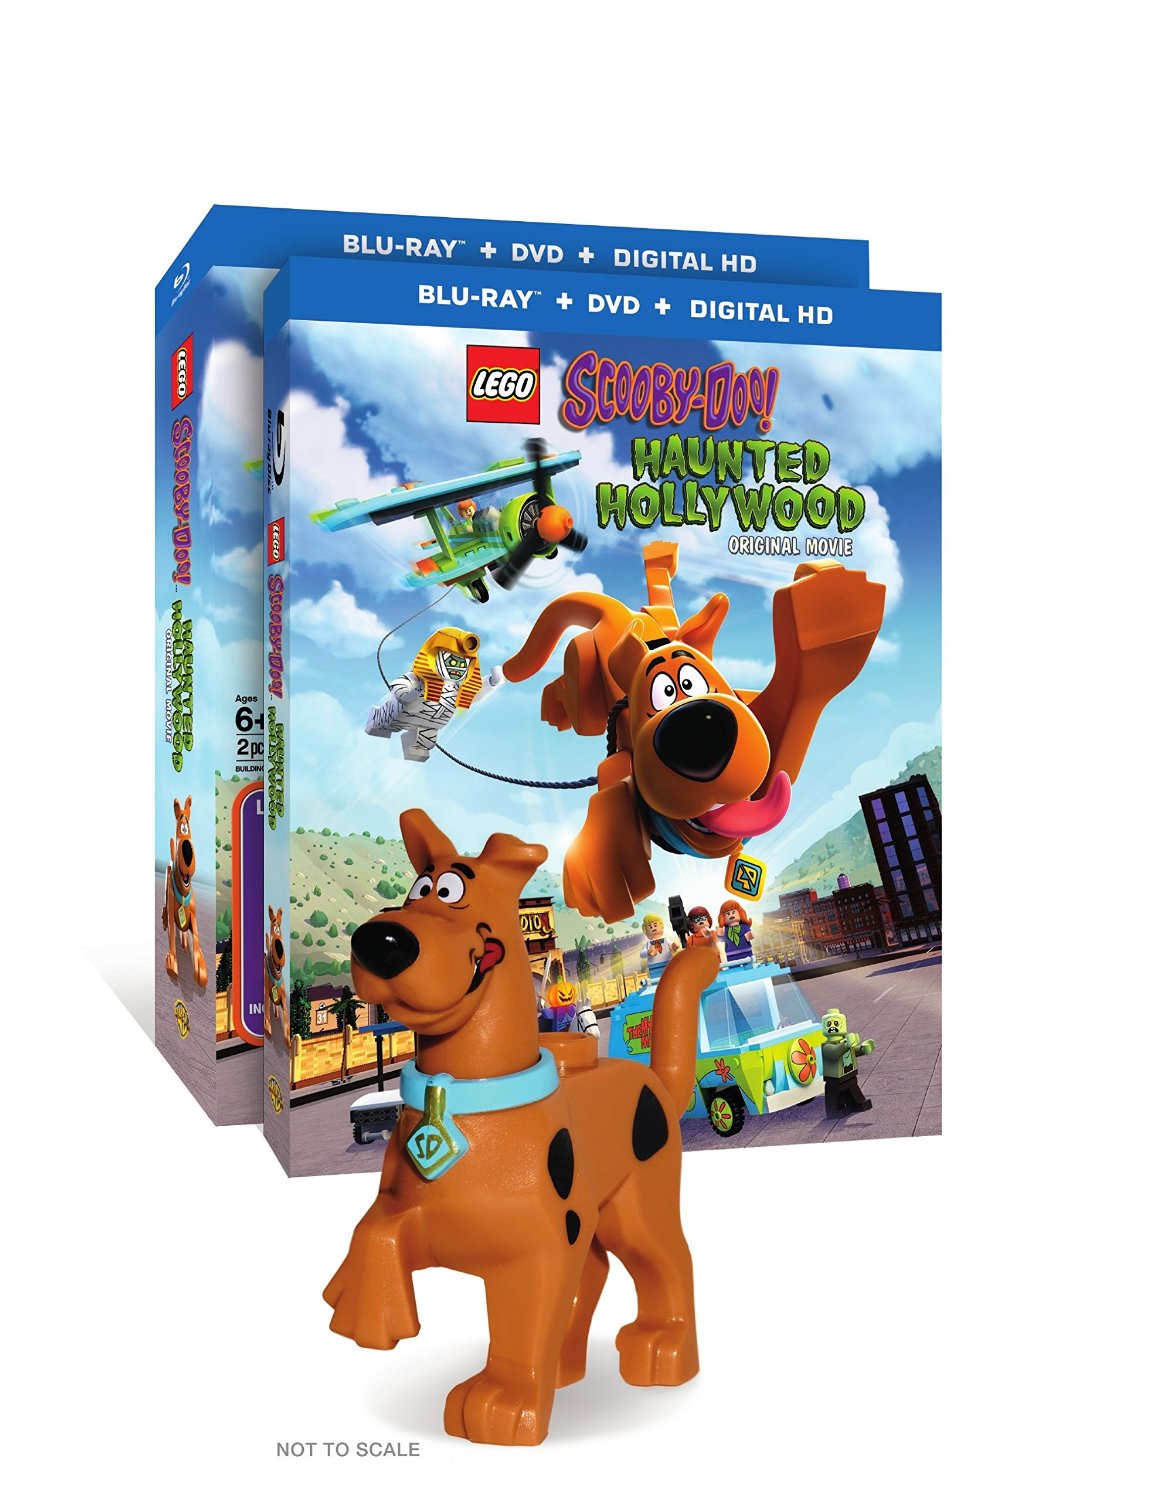 New Dimensions Fun Packs, LEGO Scooby-Doo Haunted Hollywood Movie Released  - FBTB